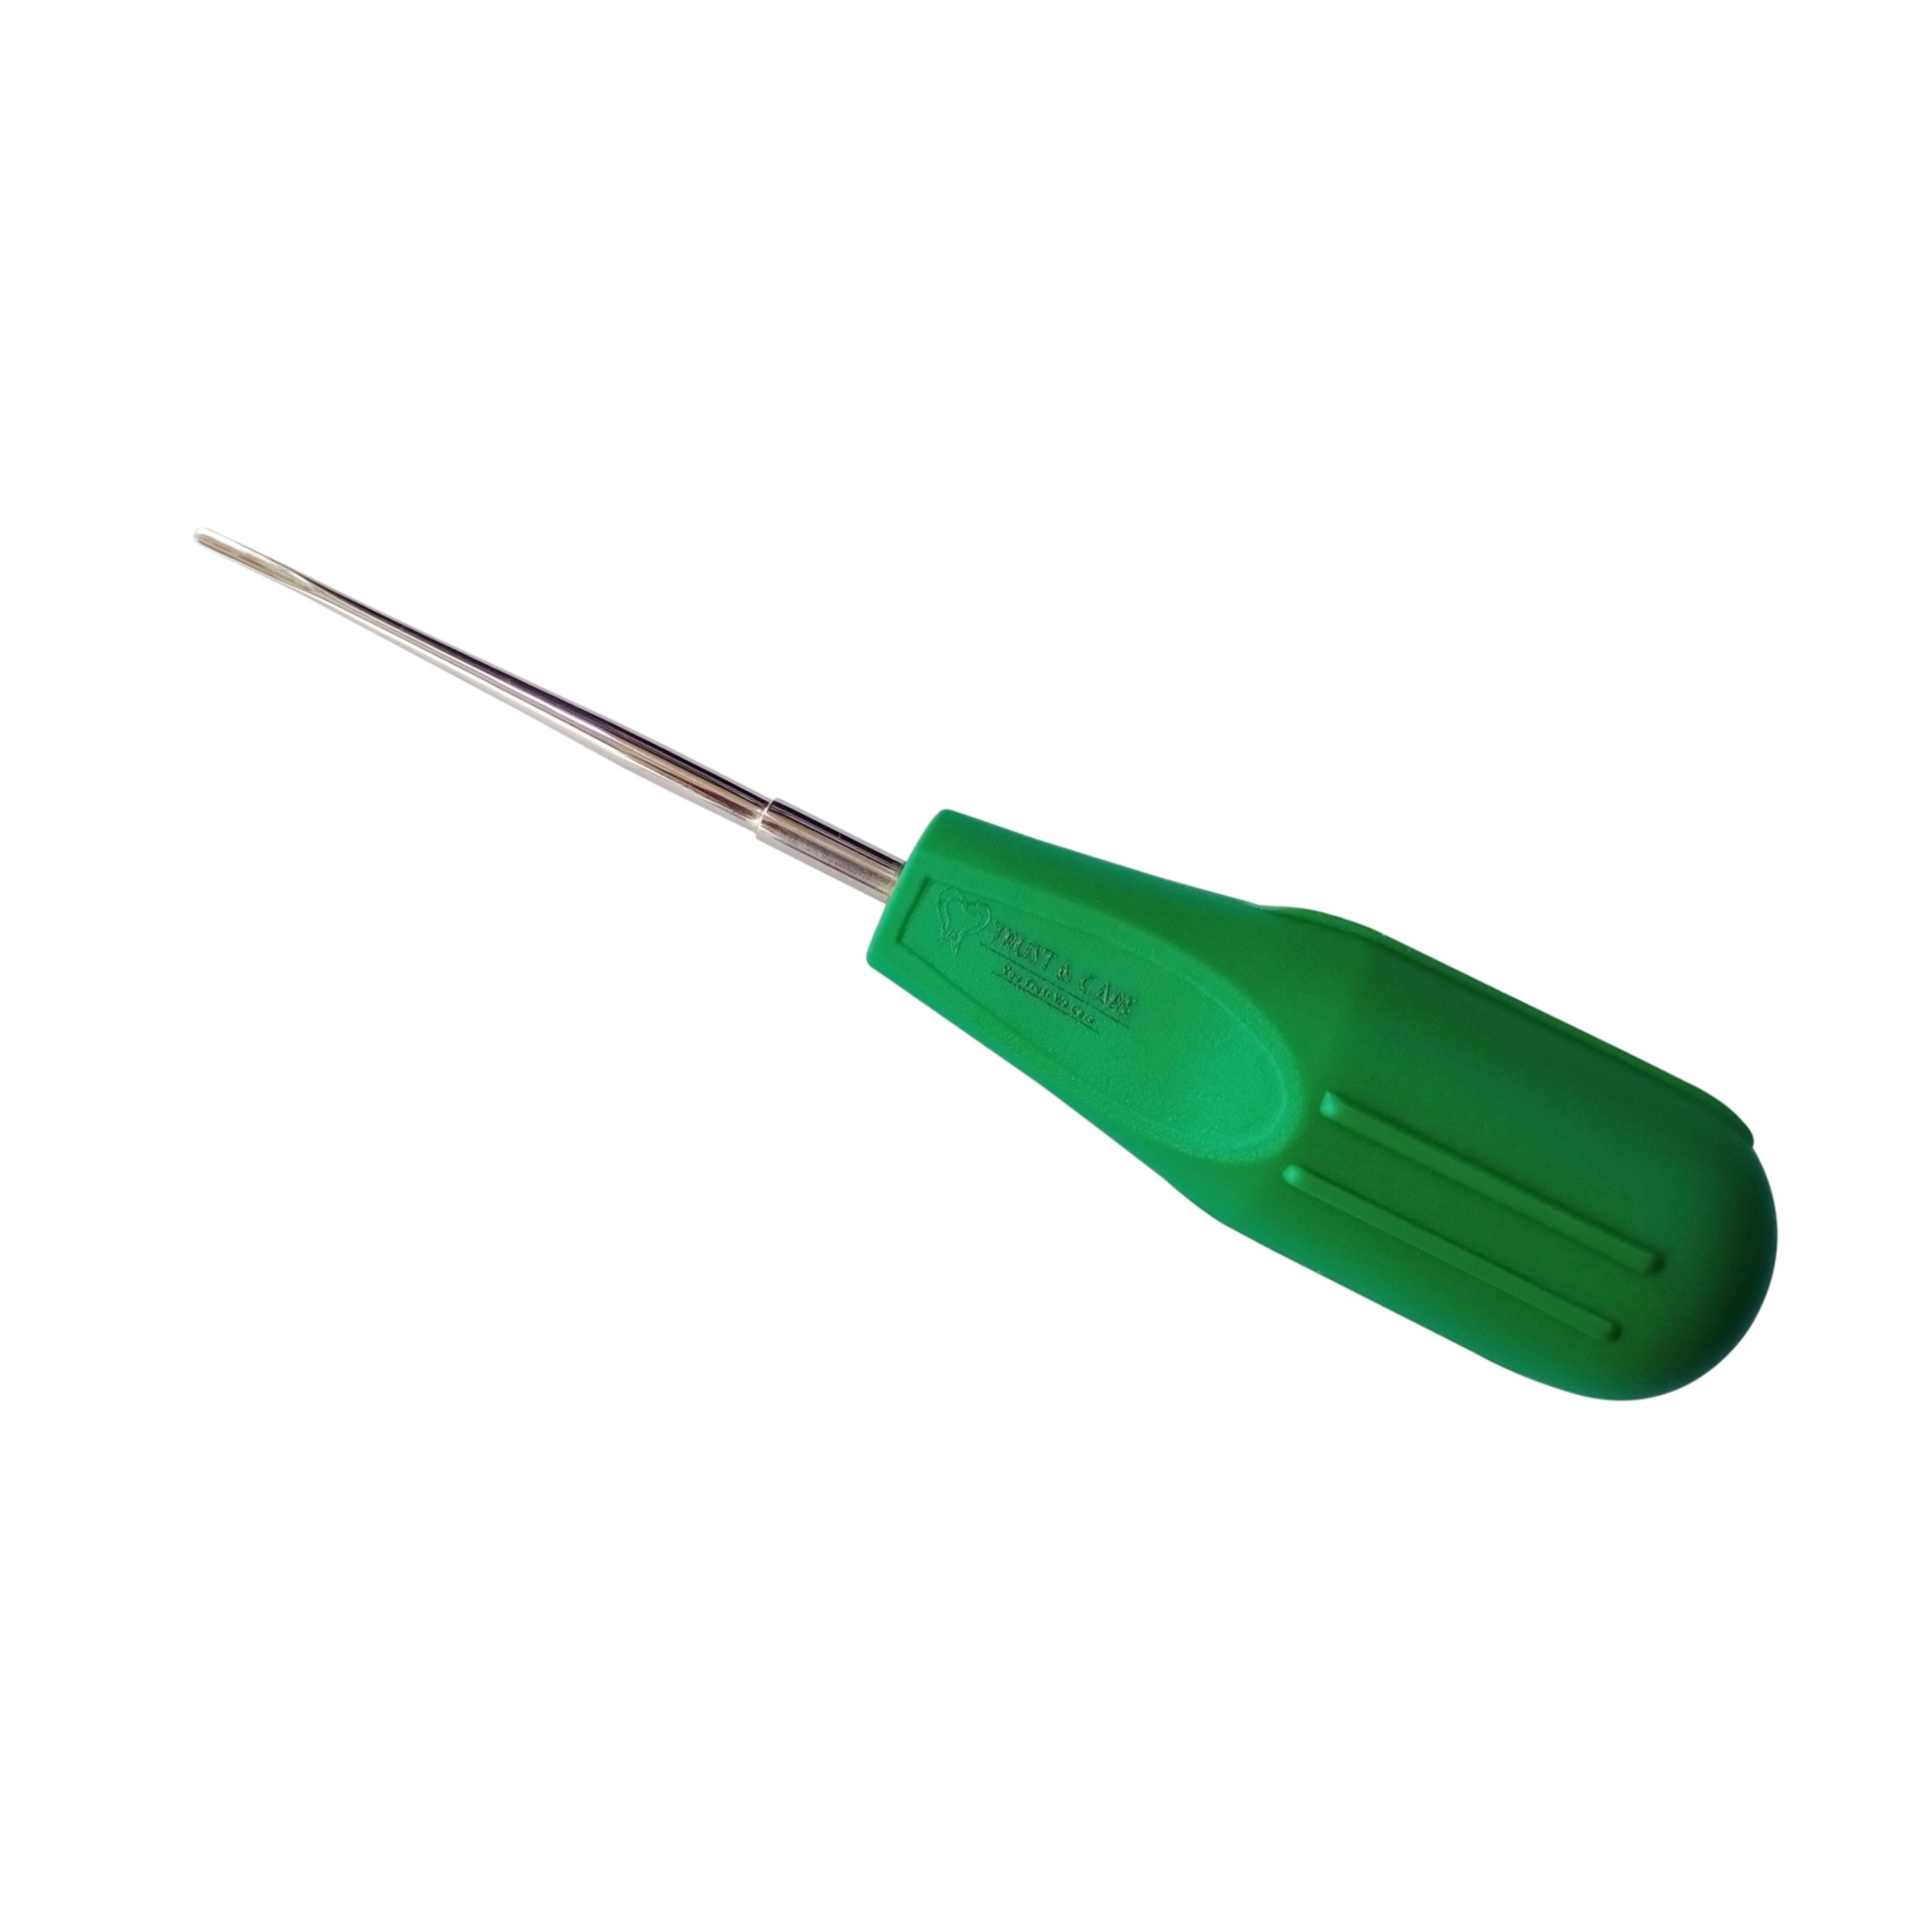 Trust & Care Luxagrip L2S 2Mm Straight, Apical  (Green)